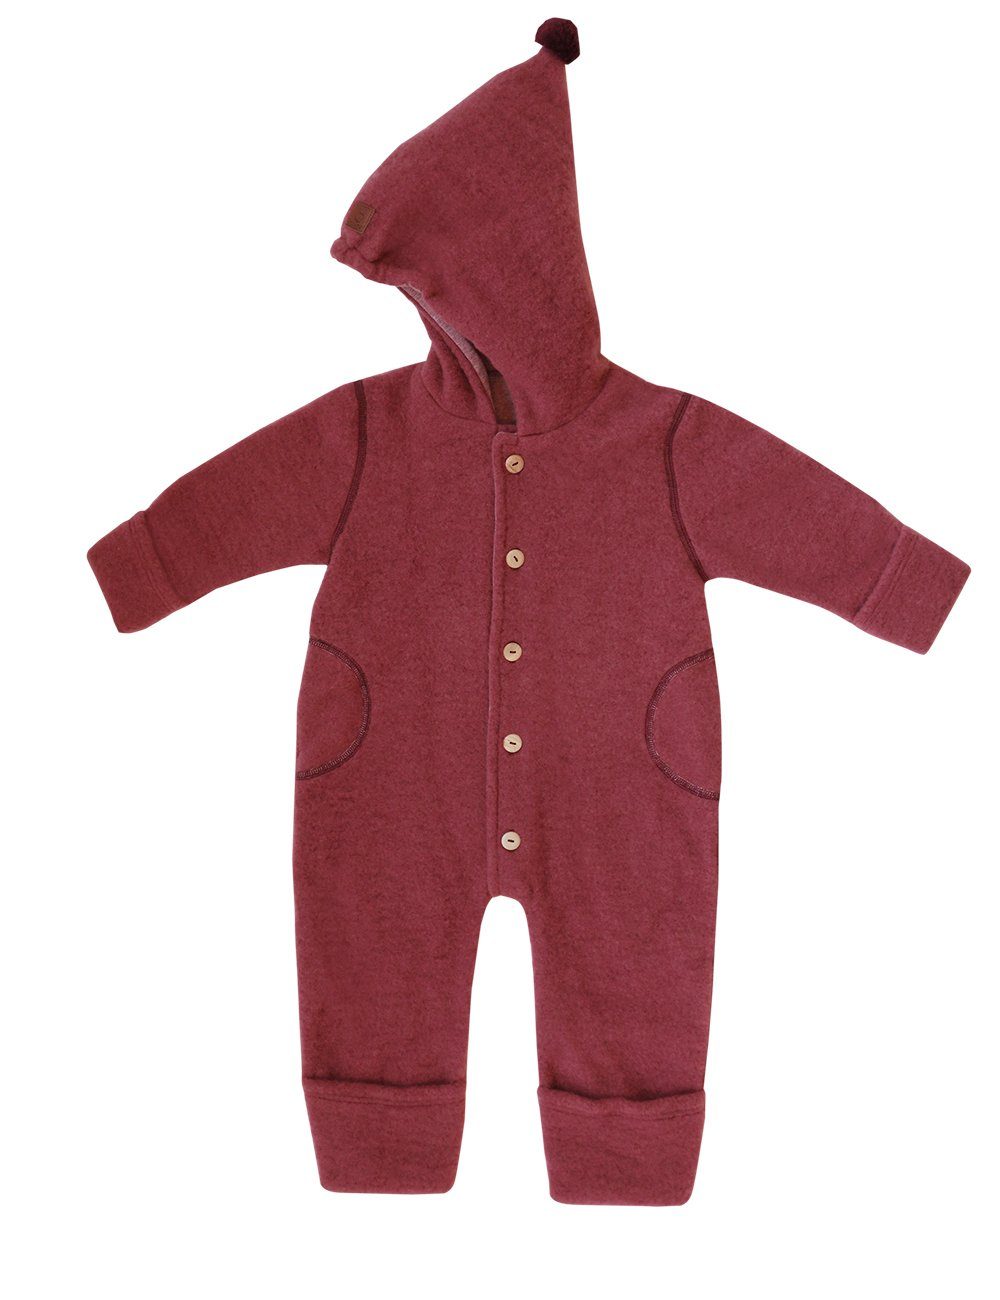 MAXIMO Overall GOTS BABY-Overall, Wollfleece kbT, Jersey kbA Wol Made in Germany wildrose/rosso-hellbraunmel.